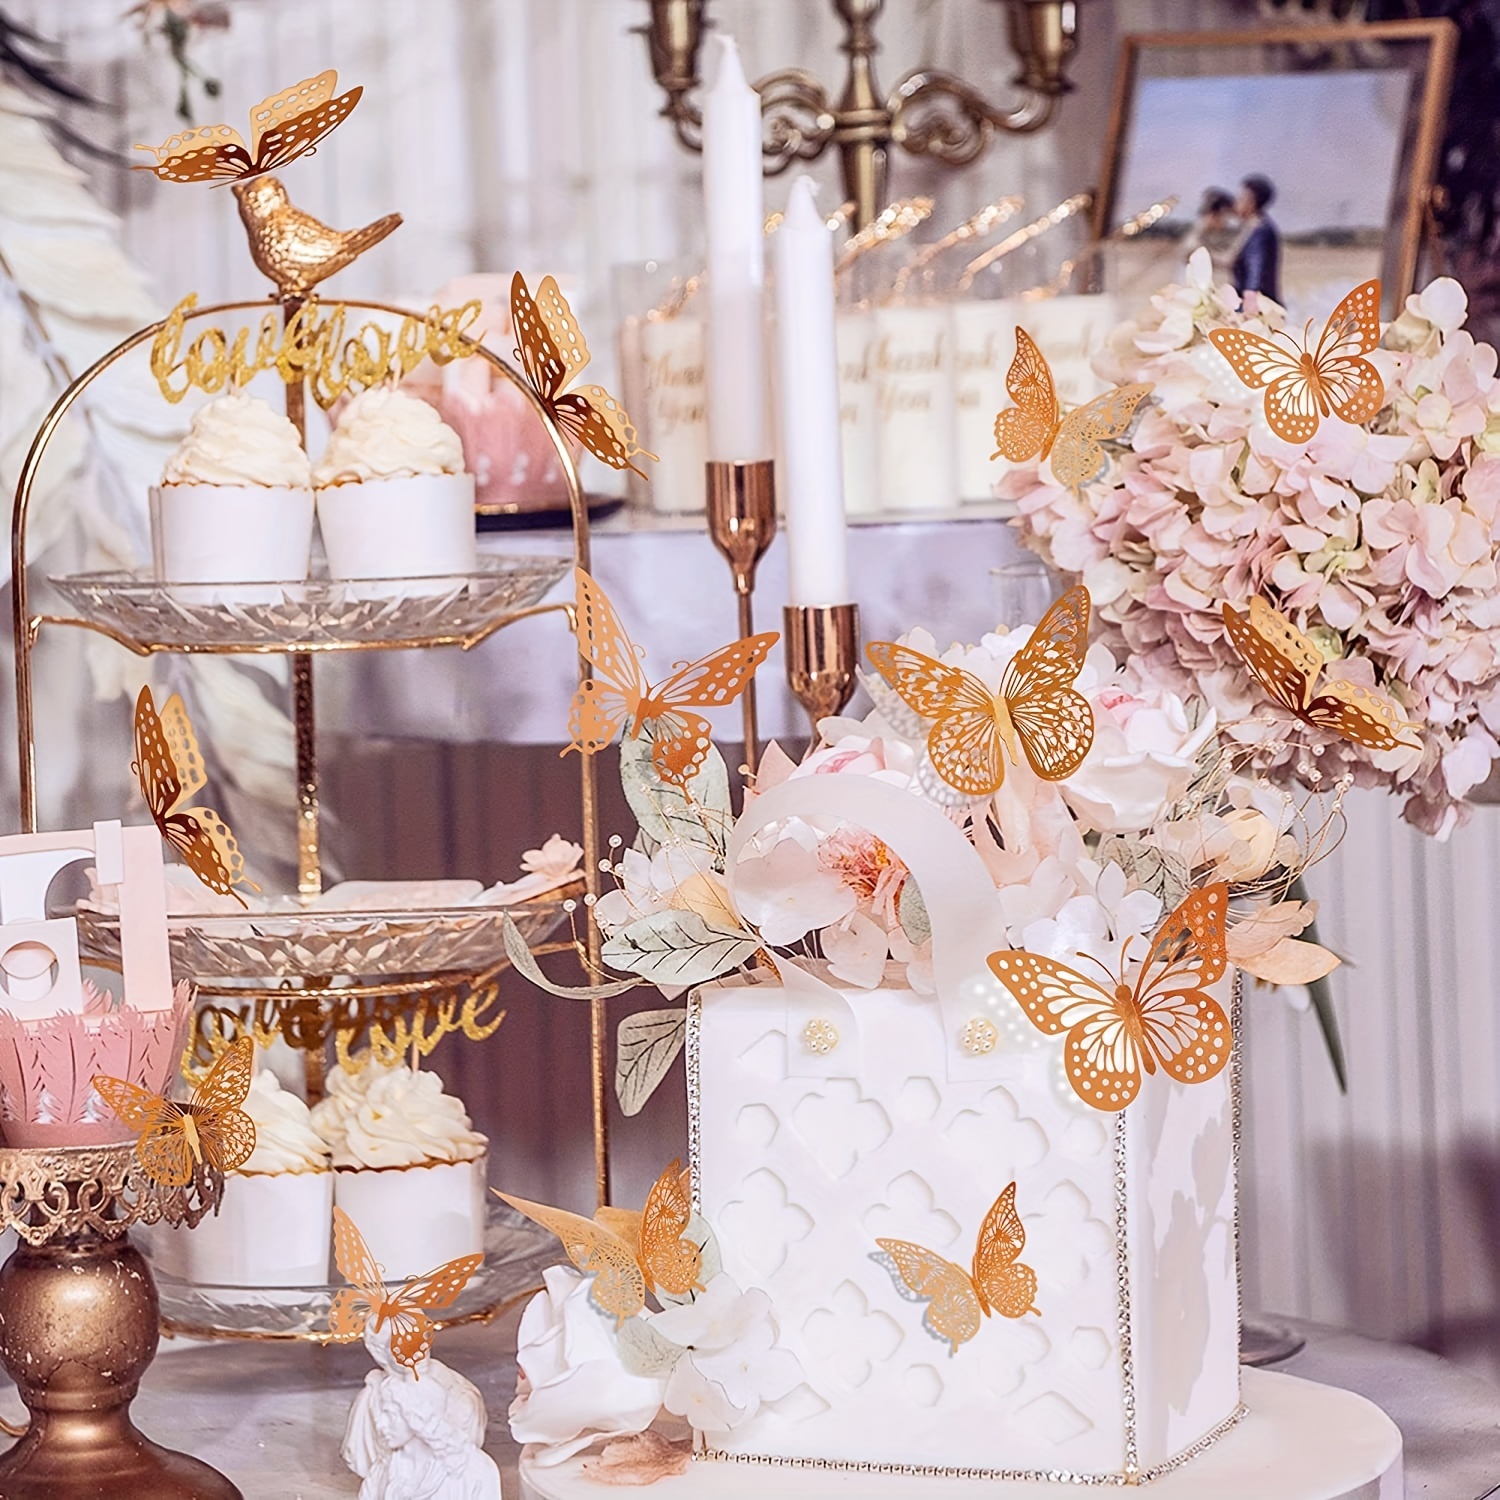 Butterfly Baby Shower Decorations for Girl Rose Gold 3D Butterfly